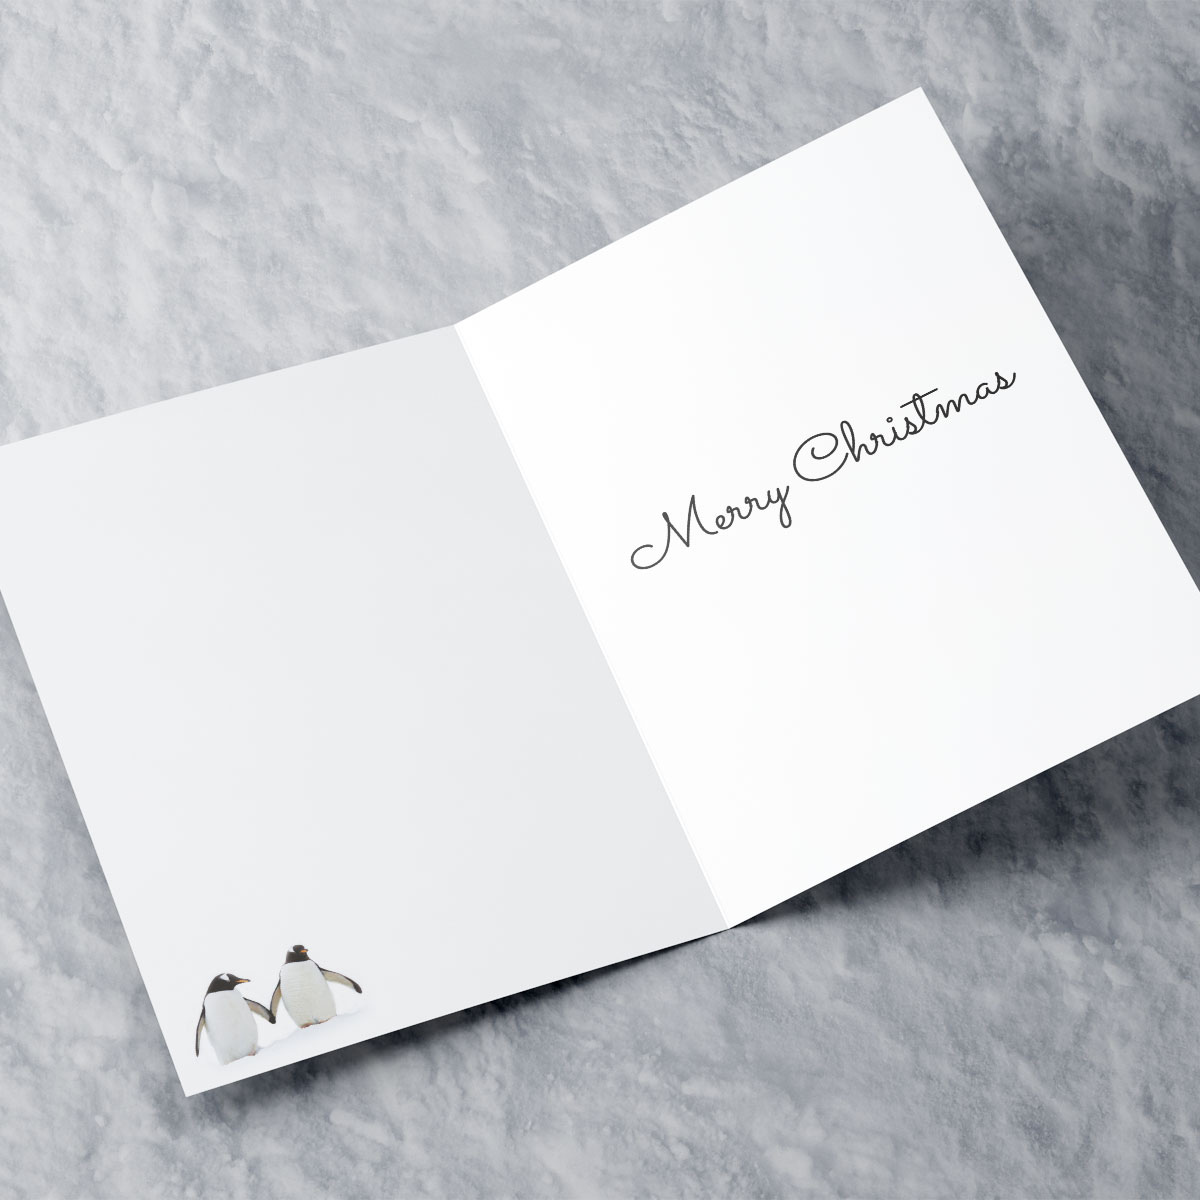 Personalised Christmas Card - Penguins - Sister and Brother-In-Law